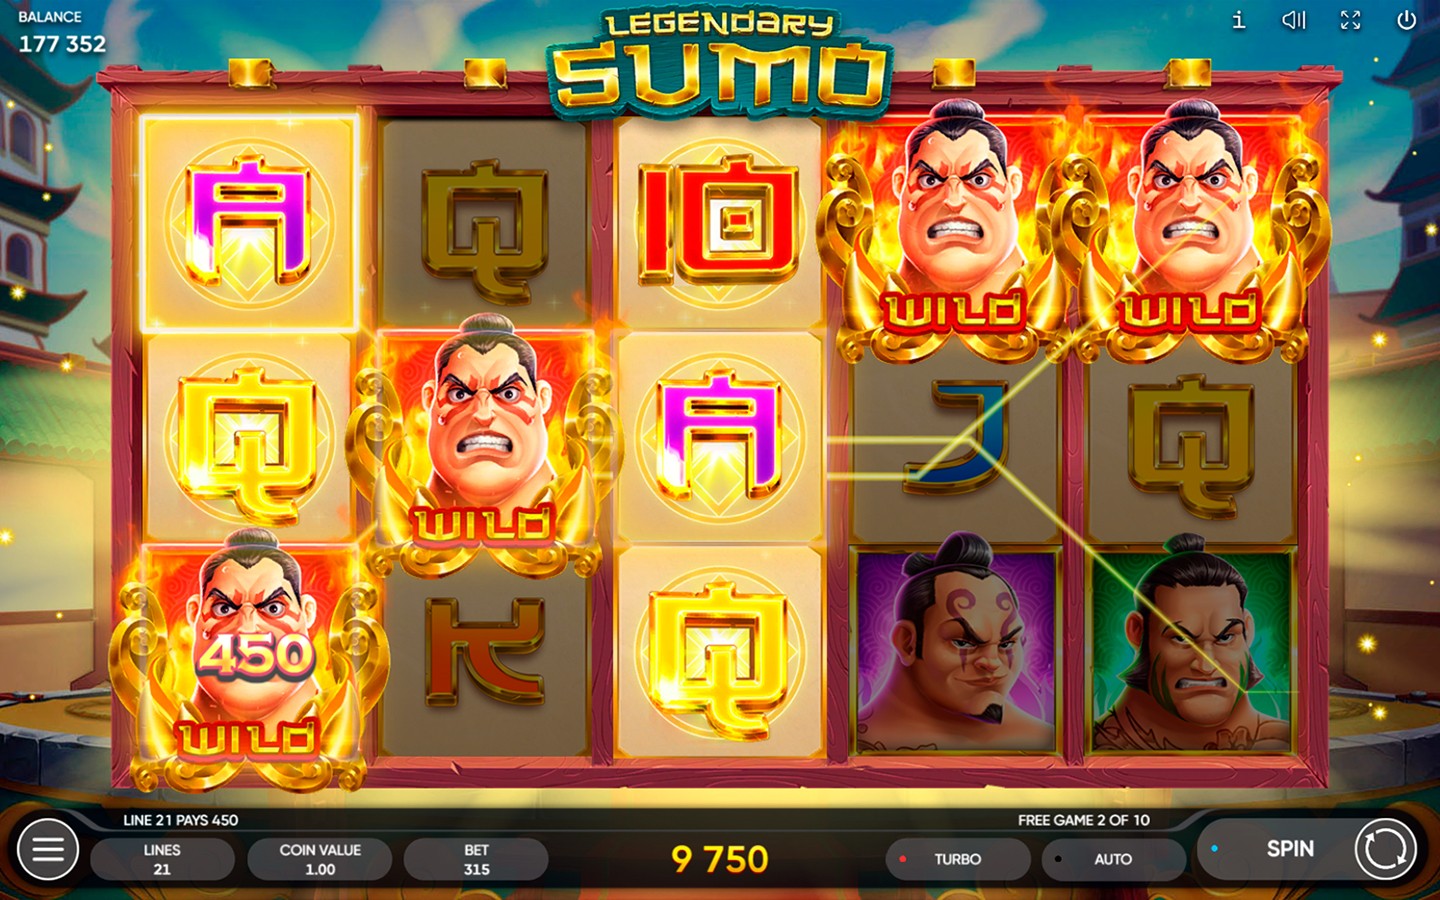 CASINO SLOT PROVIDER | Legendary Sumo slot is out!